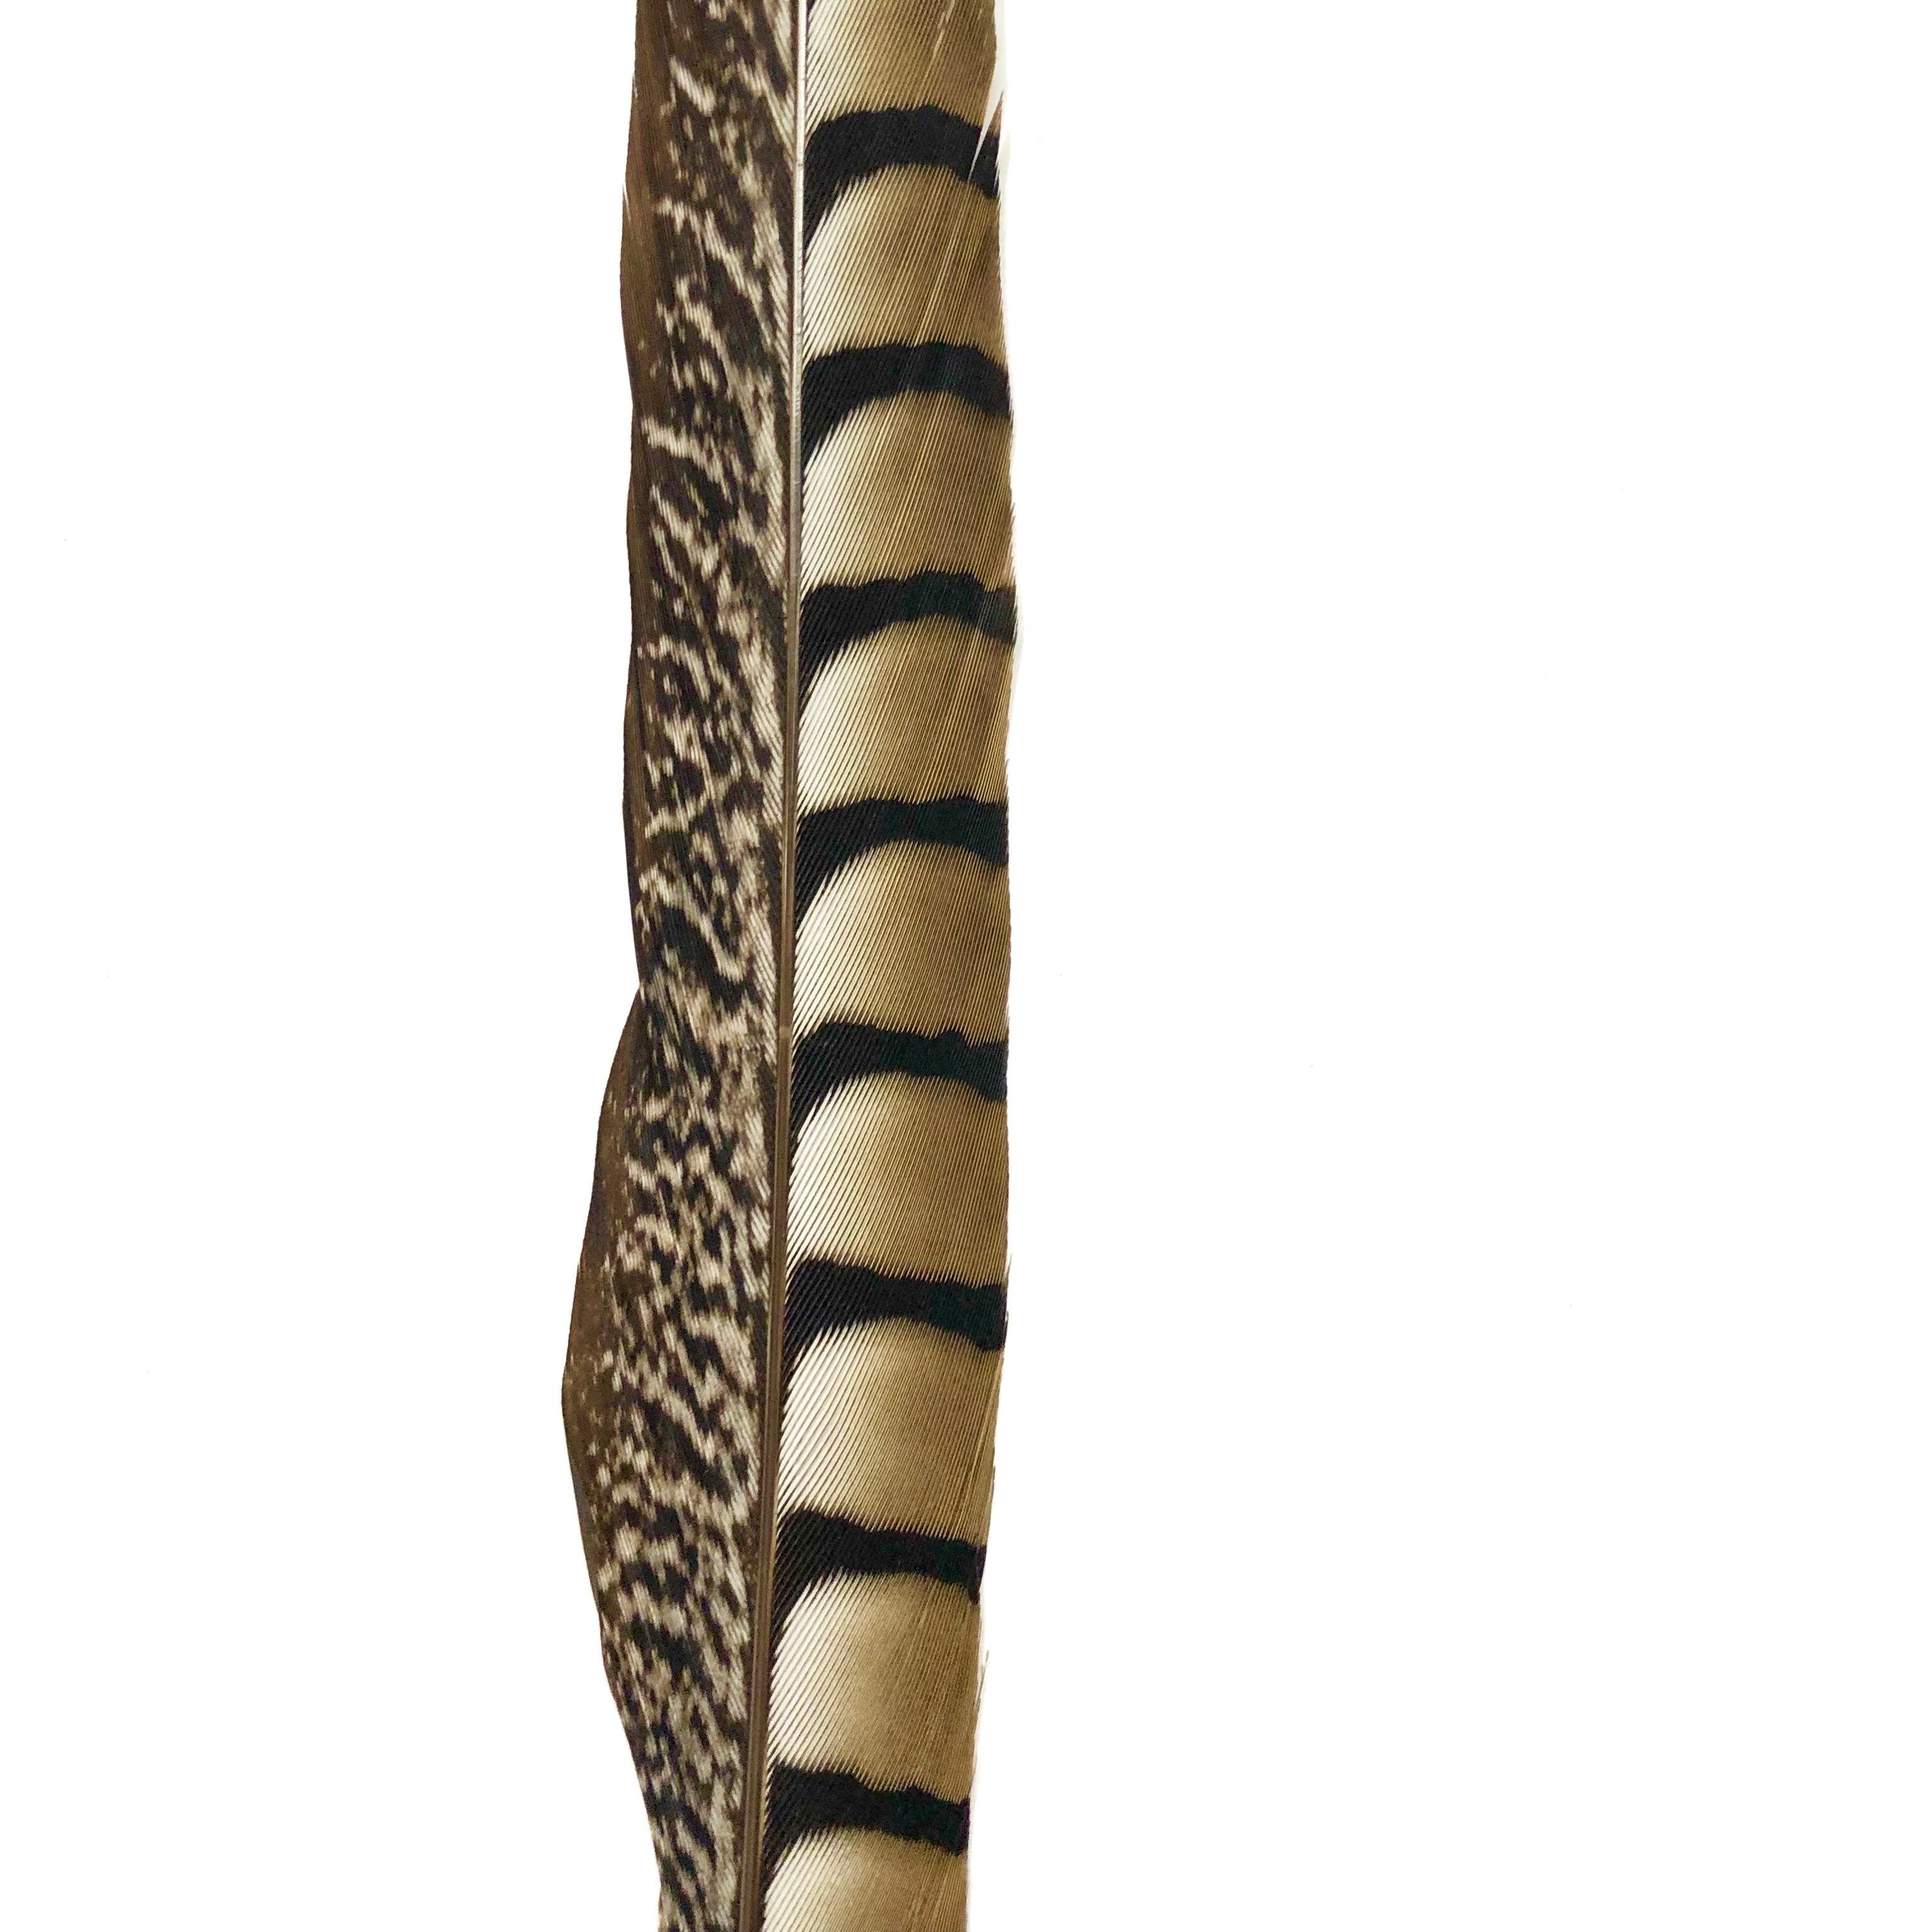 20" to 30" Lady Amherst Pheasant Side Tail Feather - Natural